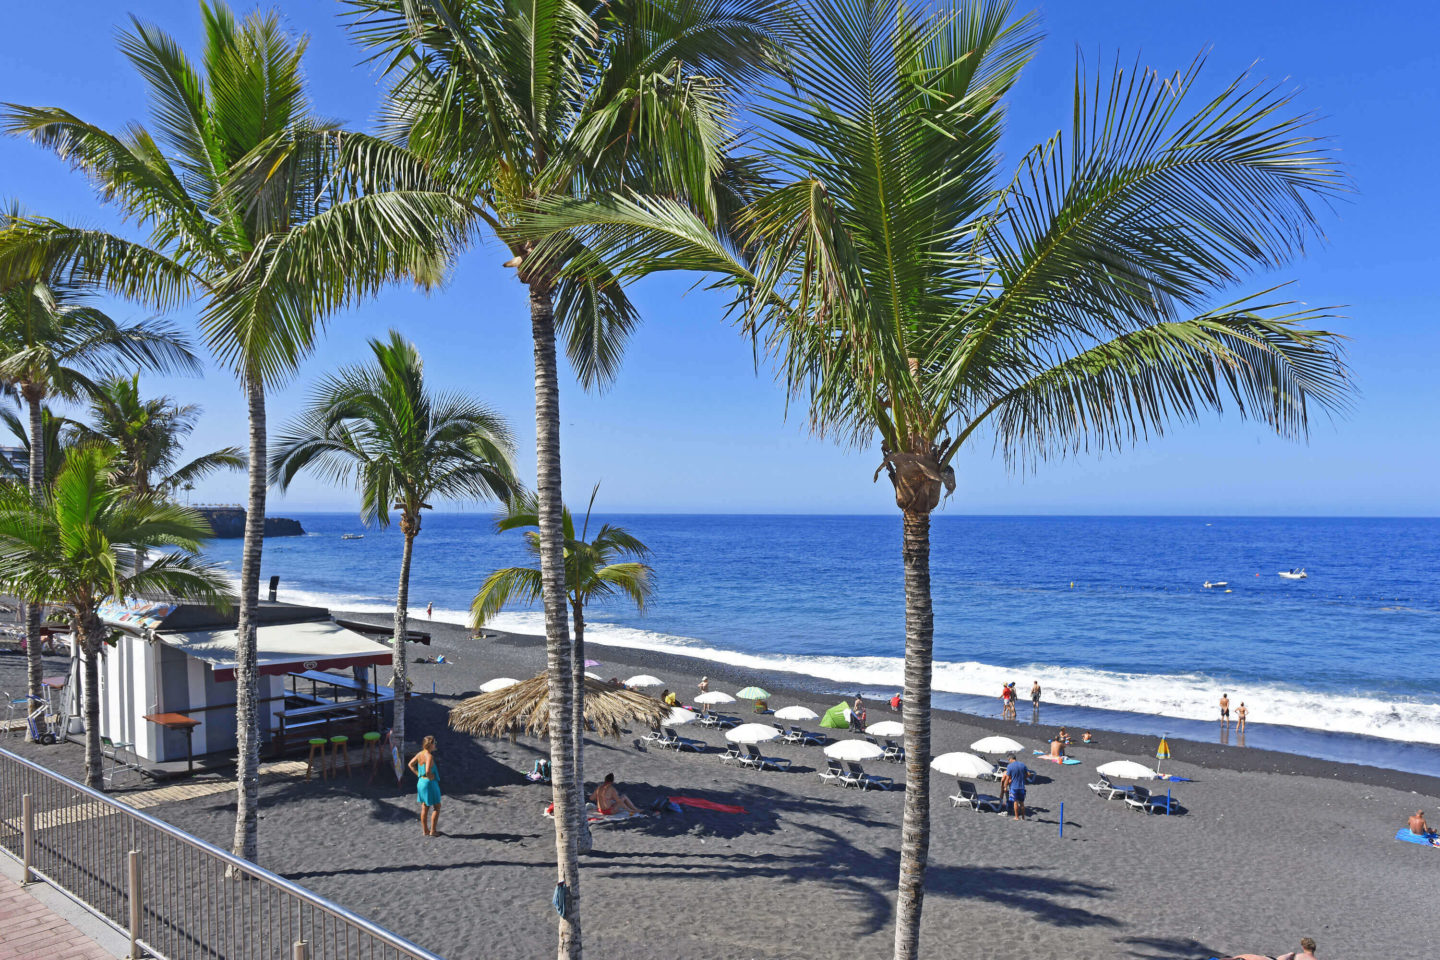 An unforgettable day in the seaside town of Puerto Naos, La Palma